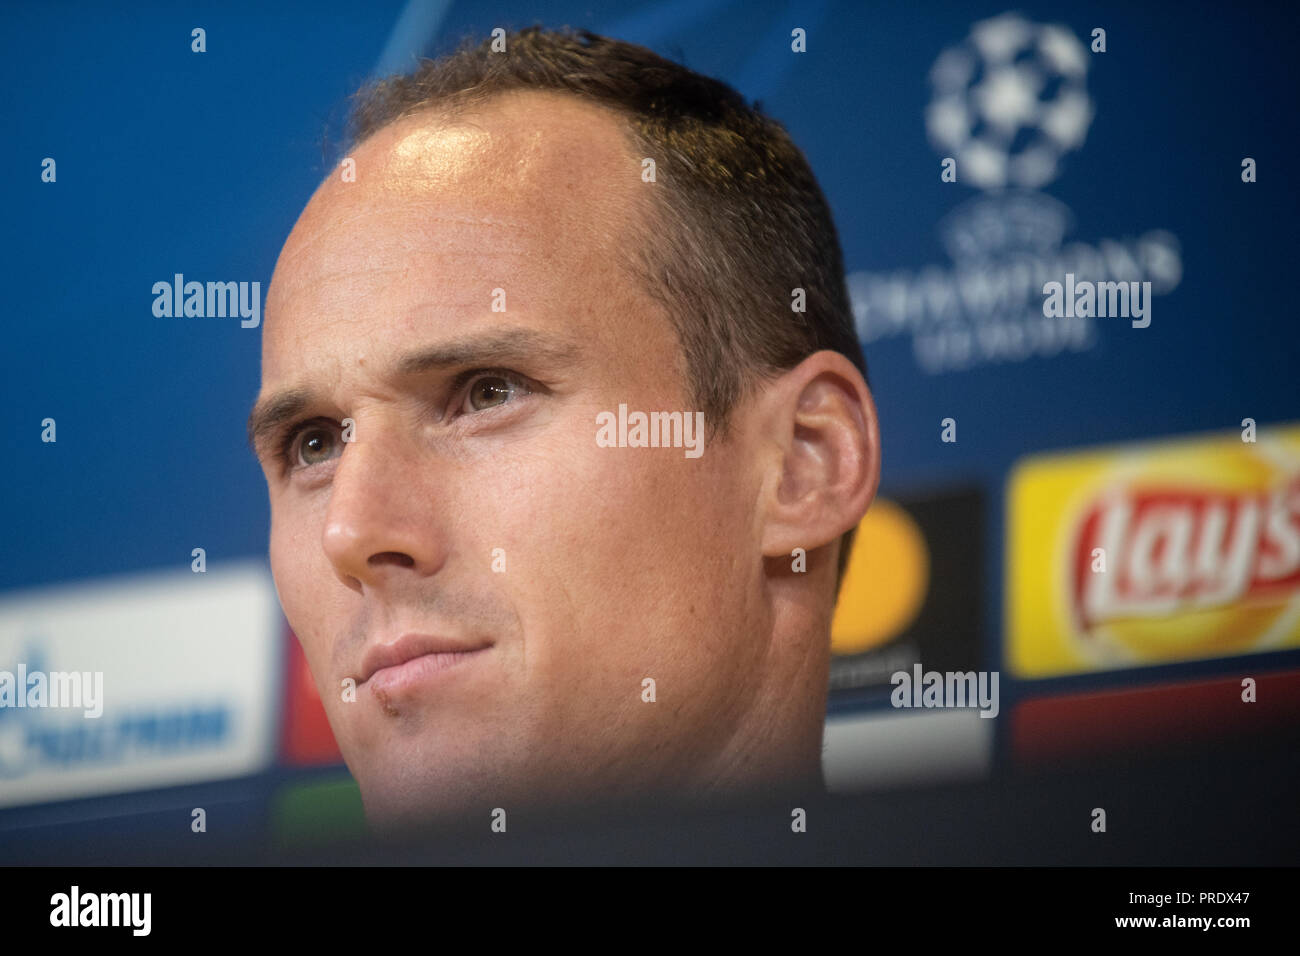 Turin, Italy. 1st Oct 2018. Steve von Bergen (Young Boys) during the press conference before the UEFA Champions League group stage match between Juventus and Young Boys at the Juventus Stadium, Turin, Italy on 1 October 2018 Credit: Alberto Gandolfo/Alamy Live News Stock Photo